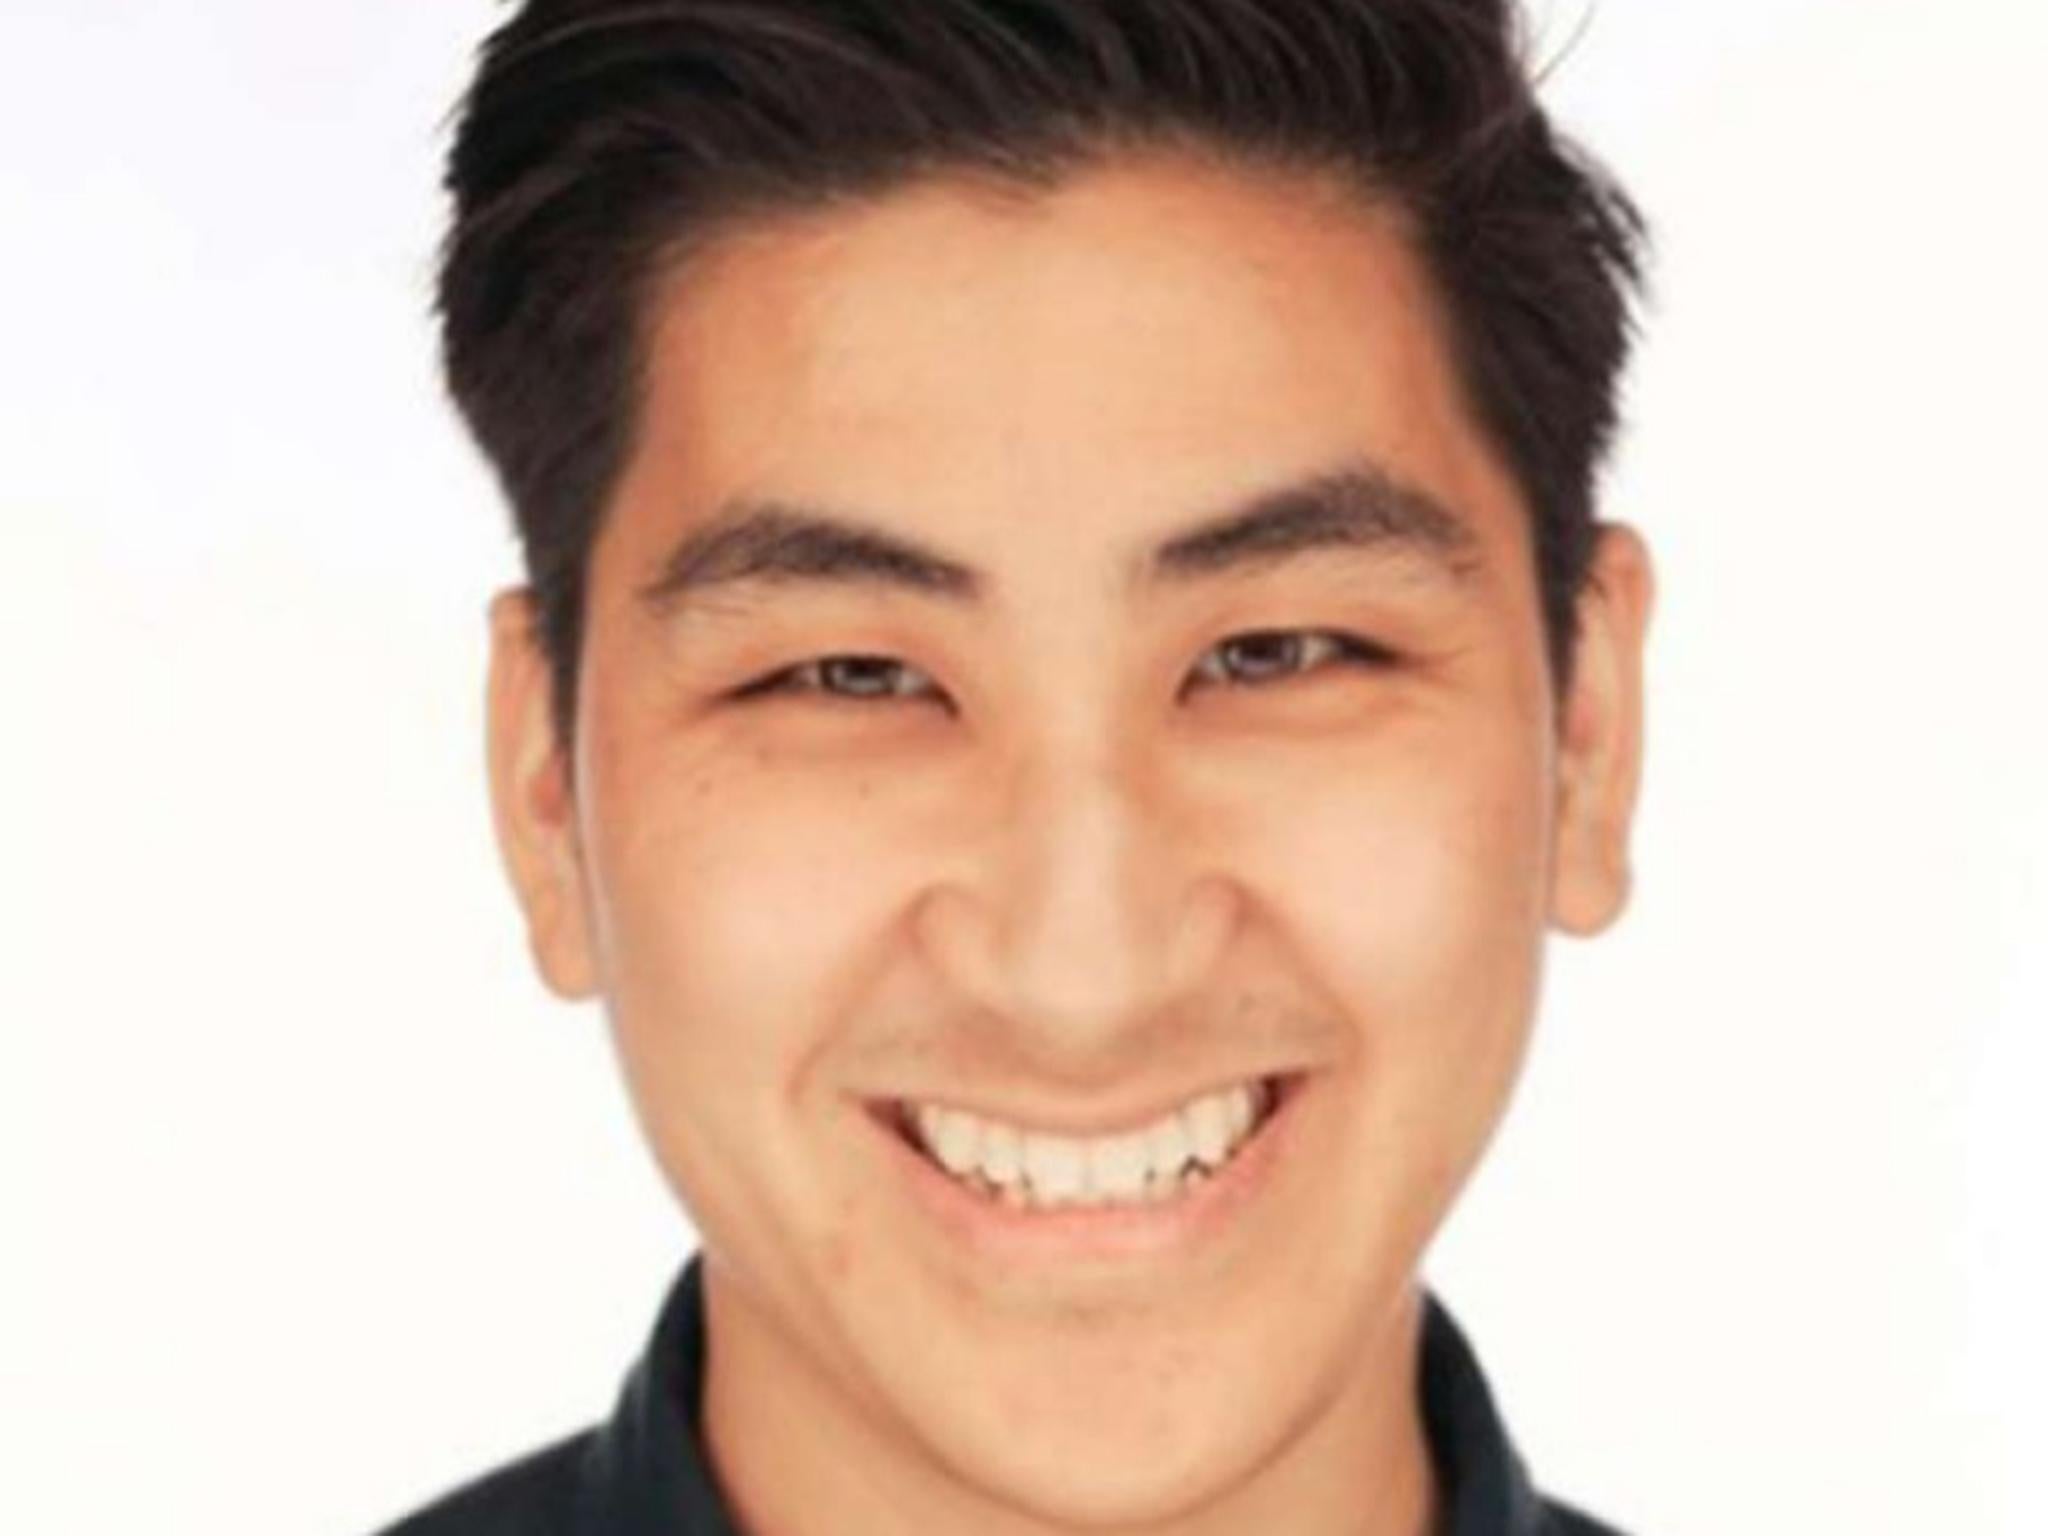 Preston Phan went from a homeless shelter to a six-figure salary